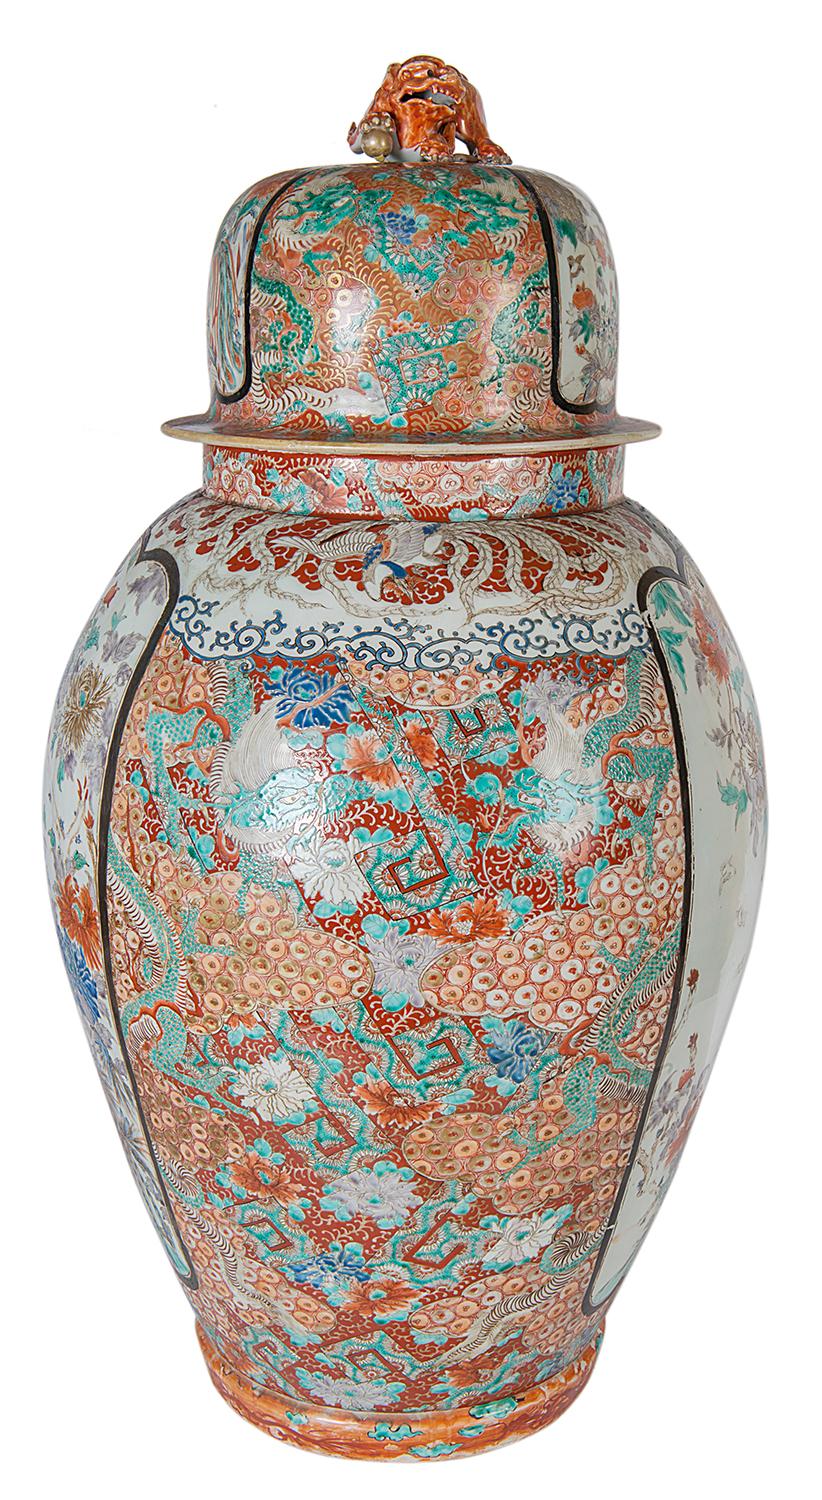 A large and impressive 19th century Japanese Kutani lidded vase, having a dog of faux finial to the lid, inset painted panels depicting exotic birds, flowers and foliage. The ground in classical Imari / Kutani colors, geometric motifs and mythical